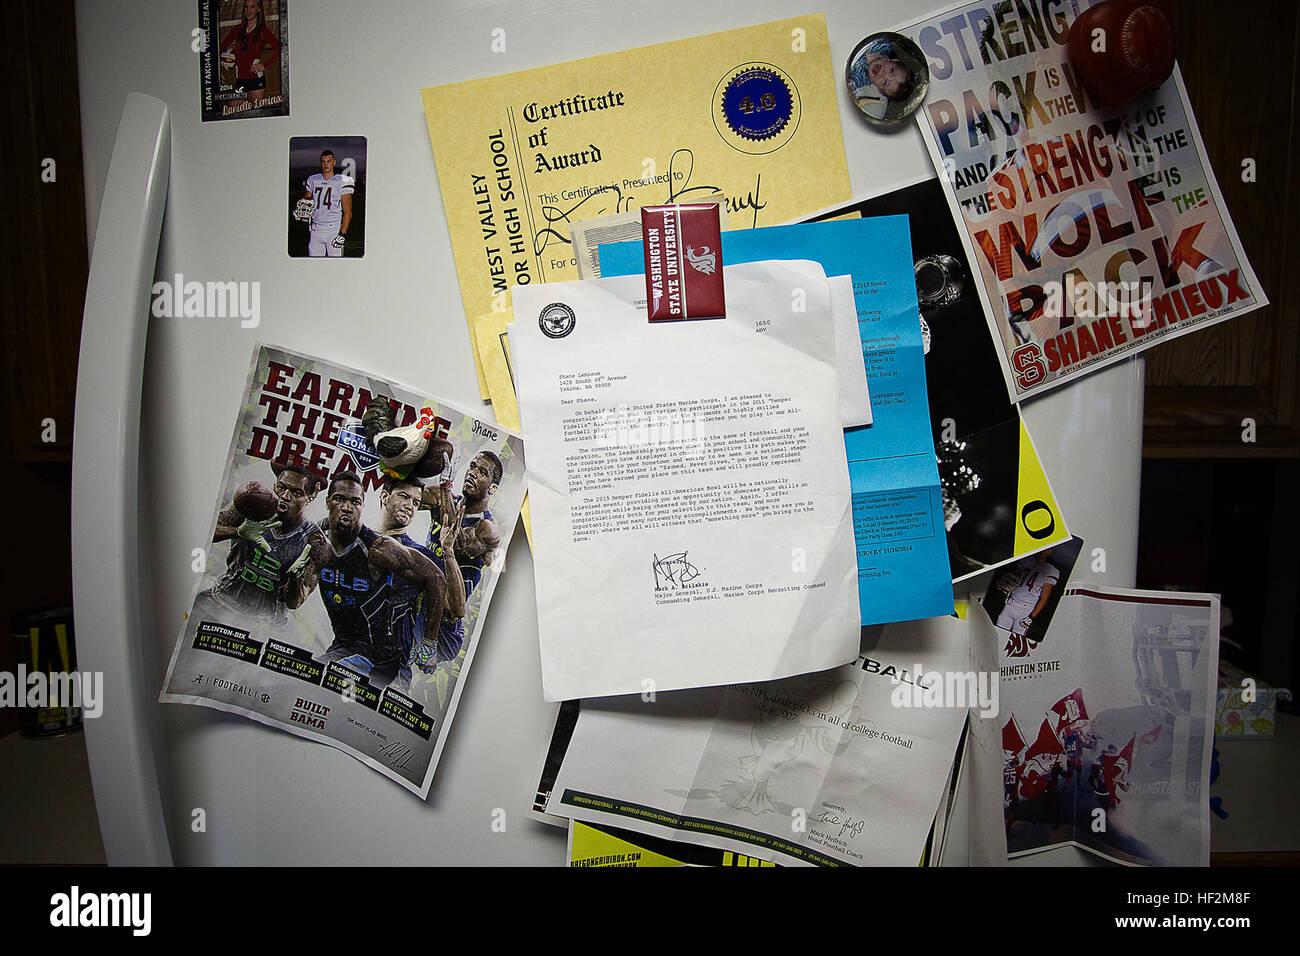 A letter (center) from Maj. Gen. Mark Brilakis, the commanding general of Marine Corps Recruiting Command, inviting Shane Lemieux, a offensive tackle for the West Valley High School Rams varsity football team, to play in the 2015 Semper Fidelis All-American Bowl hangs among college football recruitment flyers on the Lemieux family fridge at their home in Yakima, Wash., Oct. 31, 2014. Lemieux, a 17-year-old University of Oregon commit, is among approximately 100 student athletes from across the nation selected to participate in the game at the StubHub Center in Carson, Calif., Jan. 4, 2015. He  Stock Photo